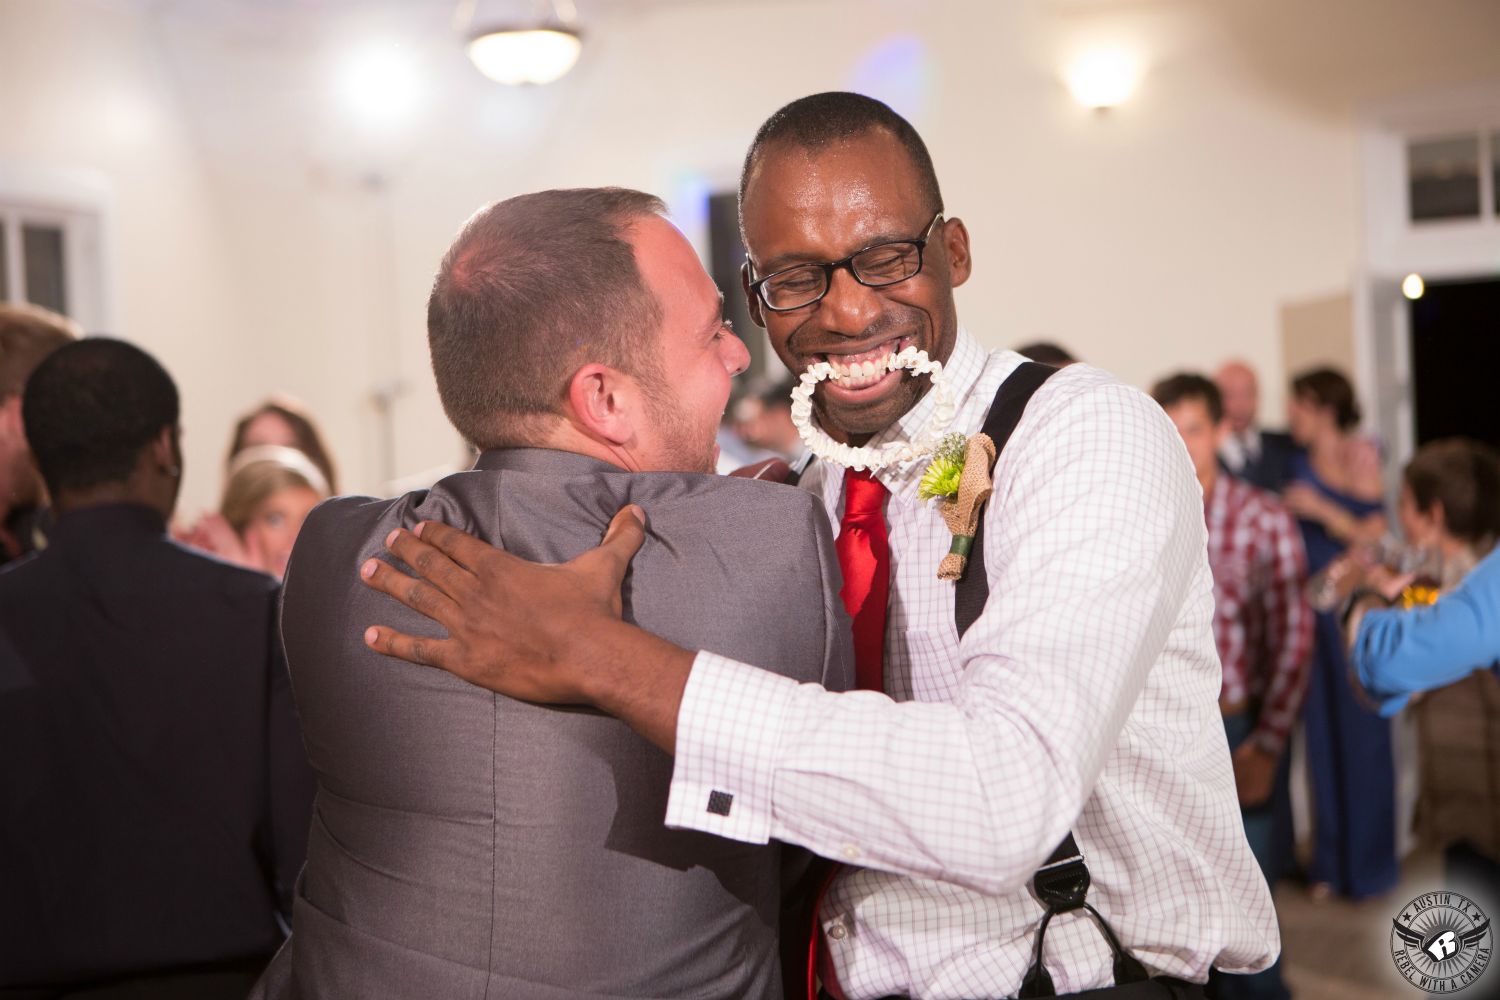 Picture taken after garter toss groom hugging best man who caught the garter and is holding it in his teeth at wedding reception at Star Hill Ranch wedding venue in the Austin area by Austin wedding photographer.